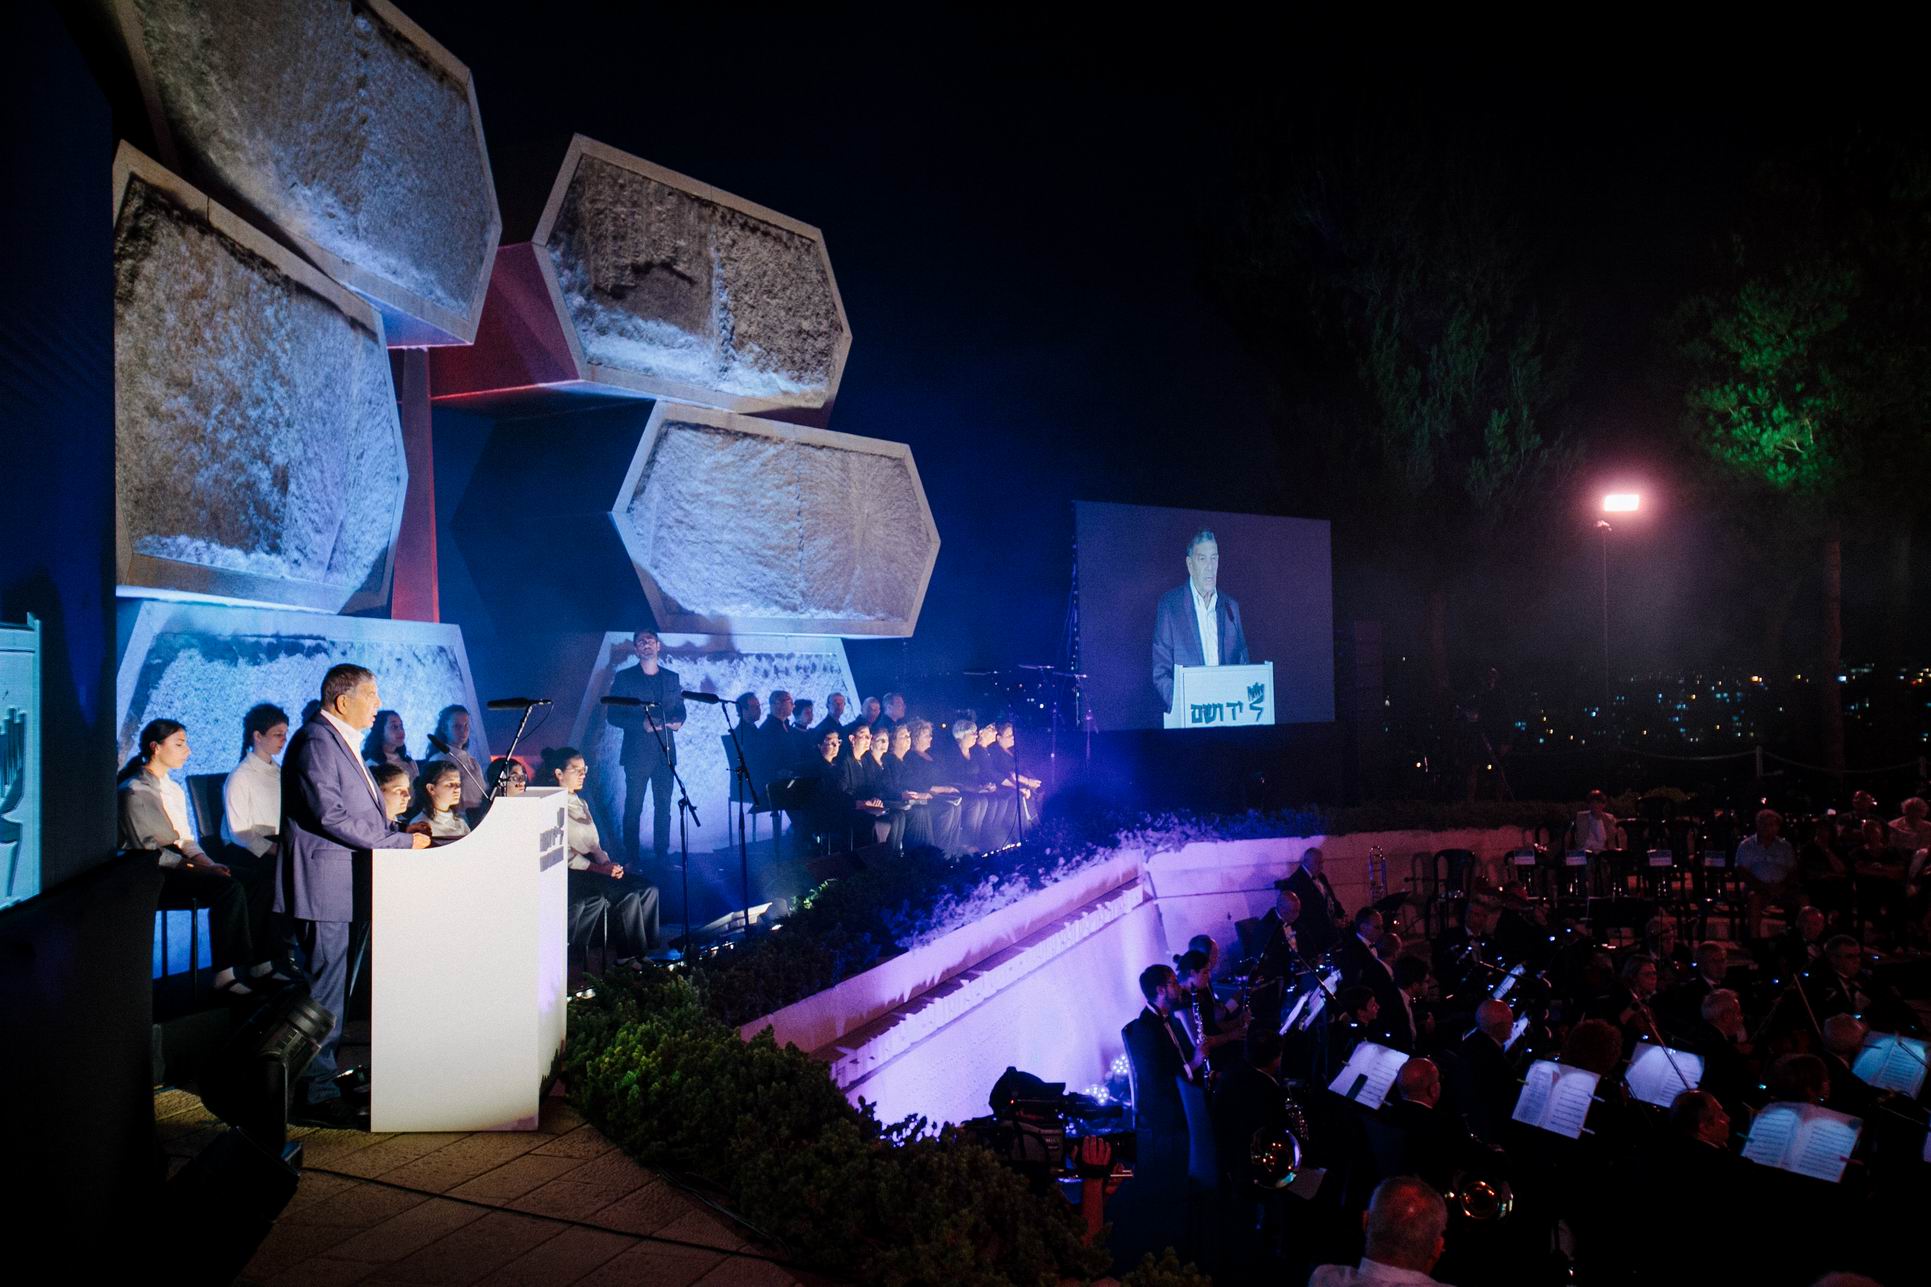 Yad Vashem Chairman Avner Shalev: Today we show our appreciation for their strength of spirit